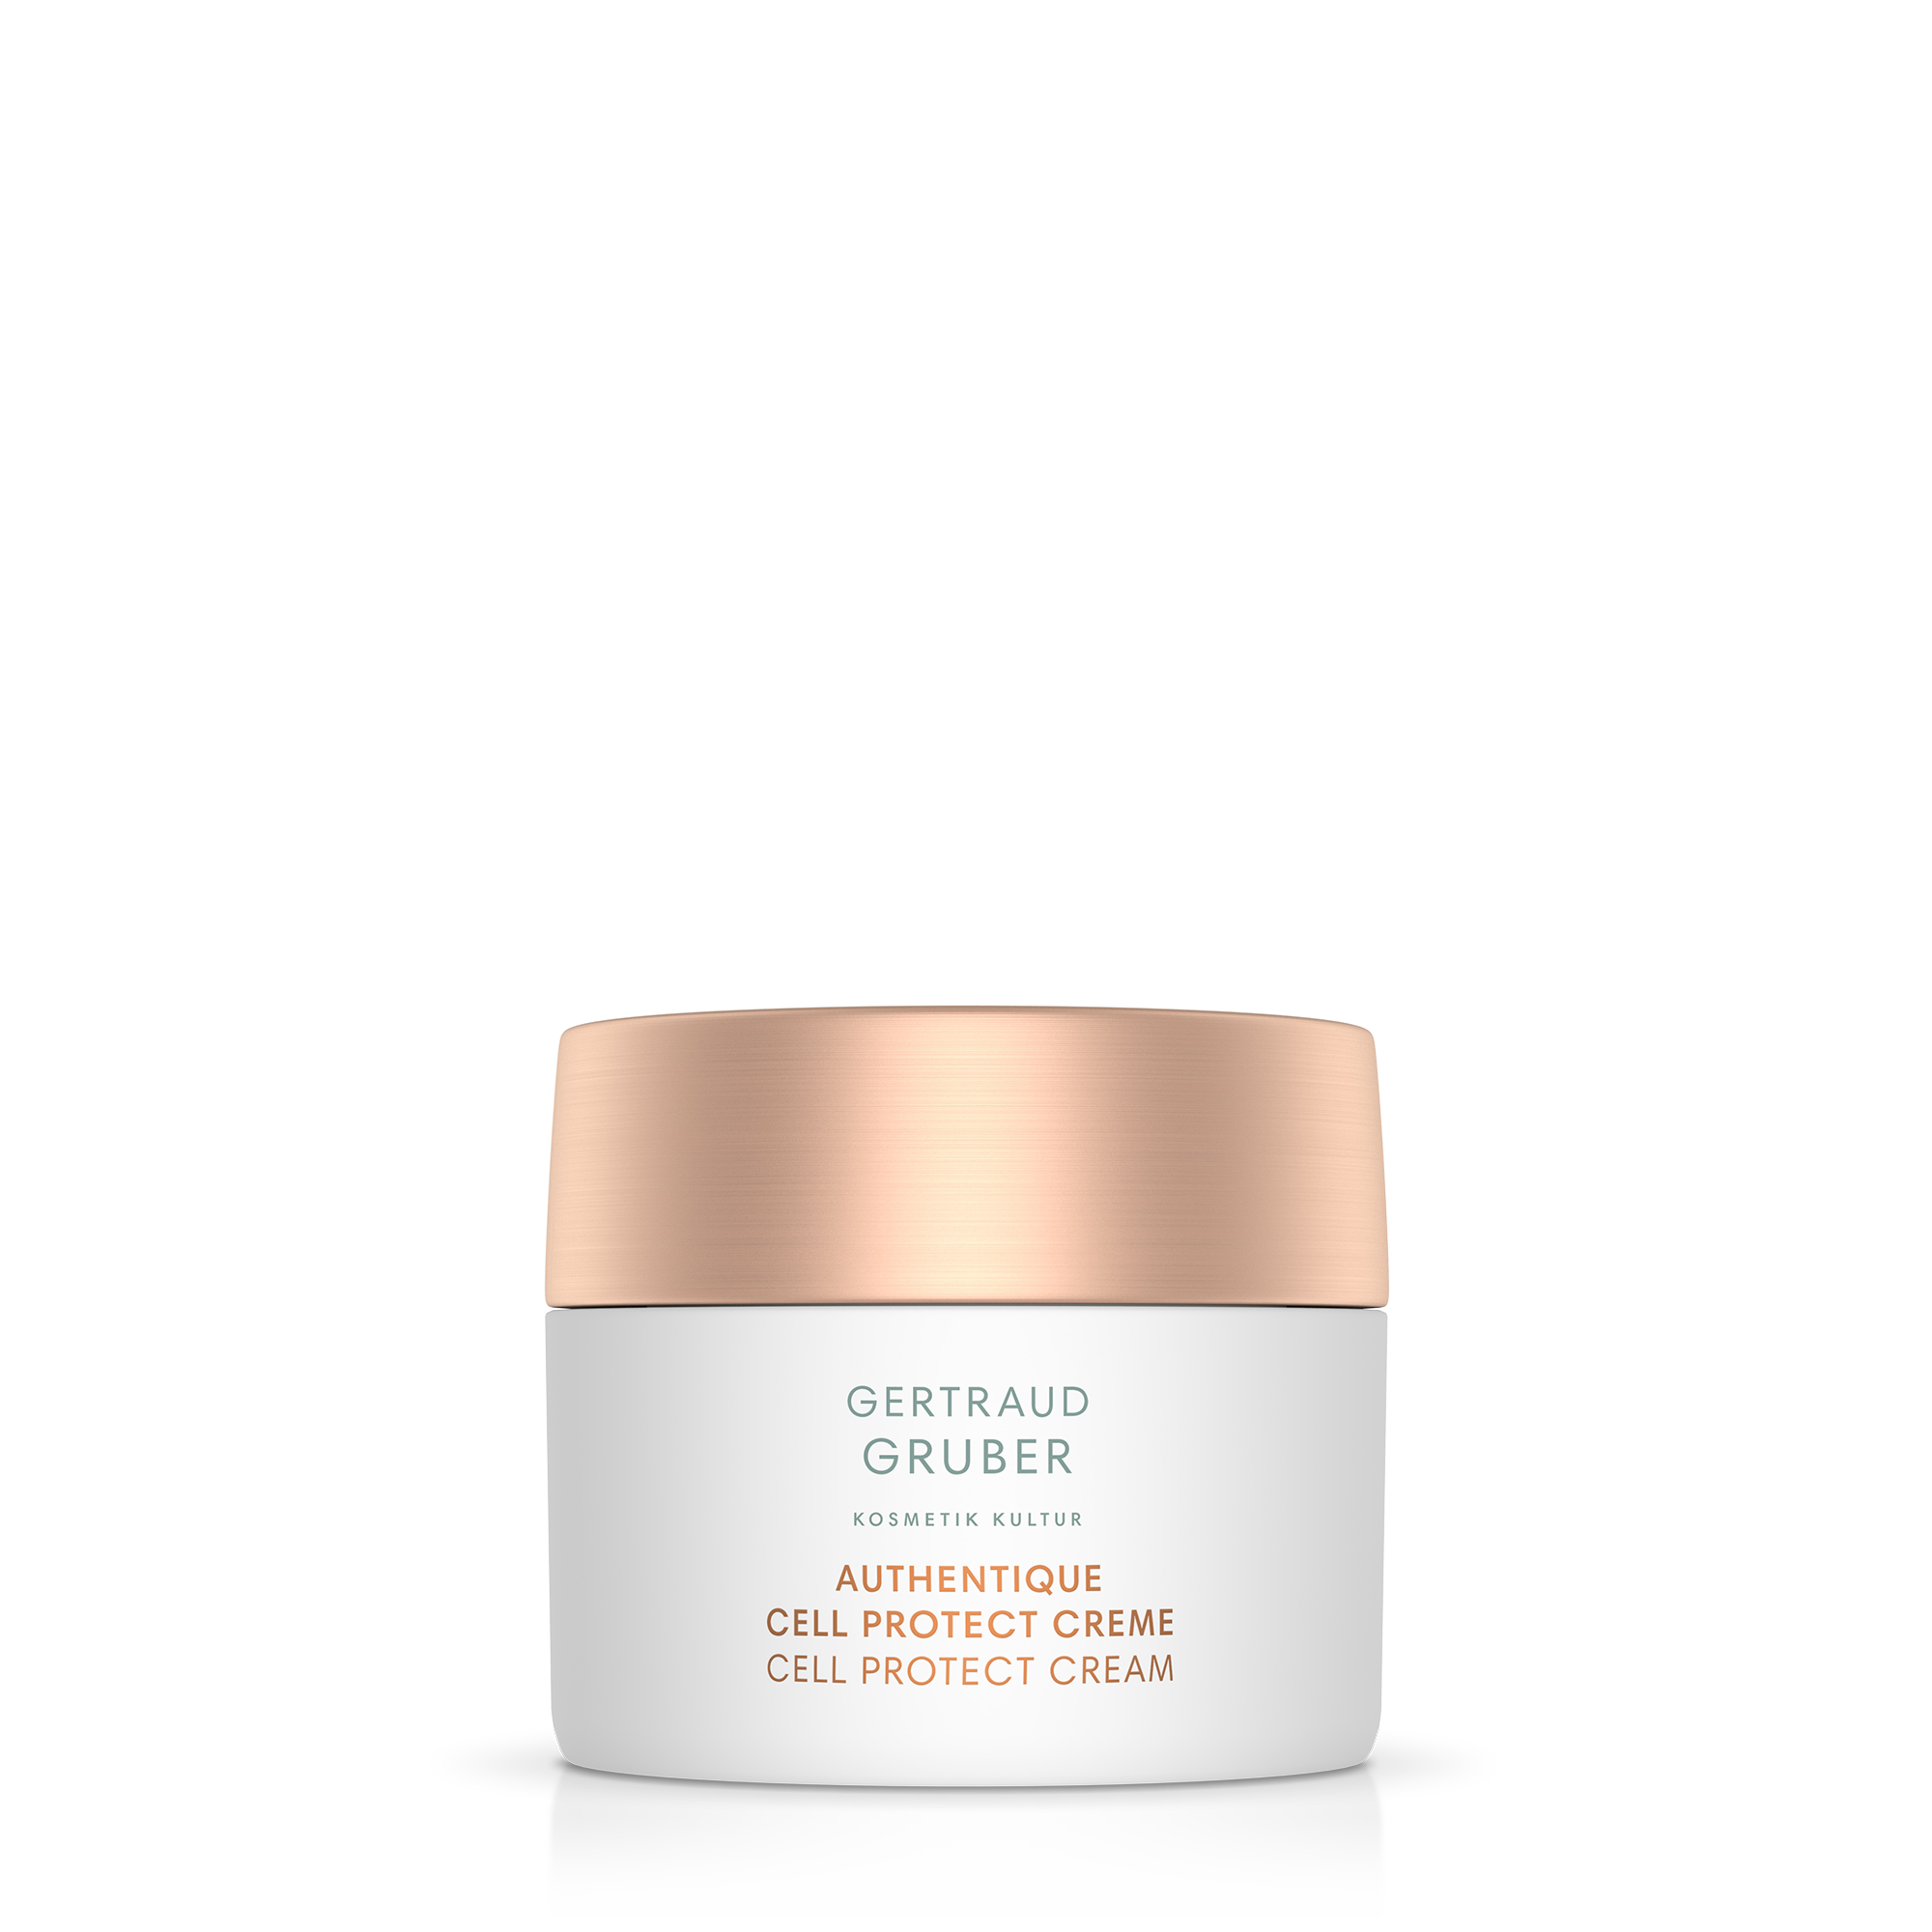 AUTHENTIQUE CELL PROTECT CREME